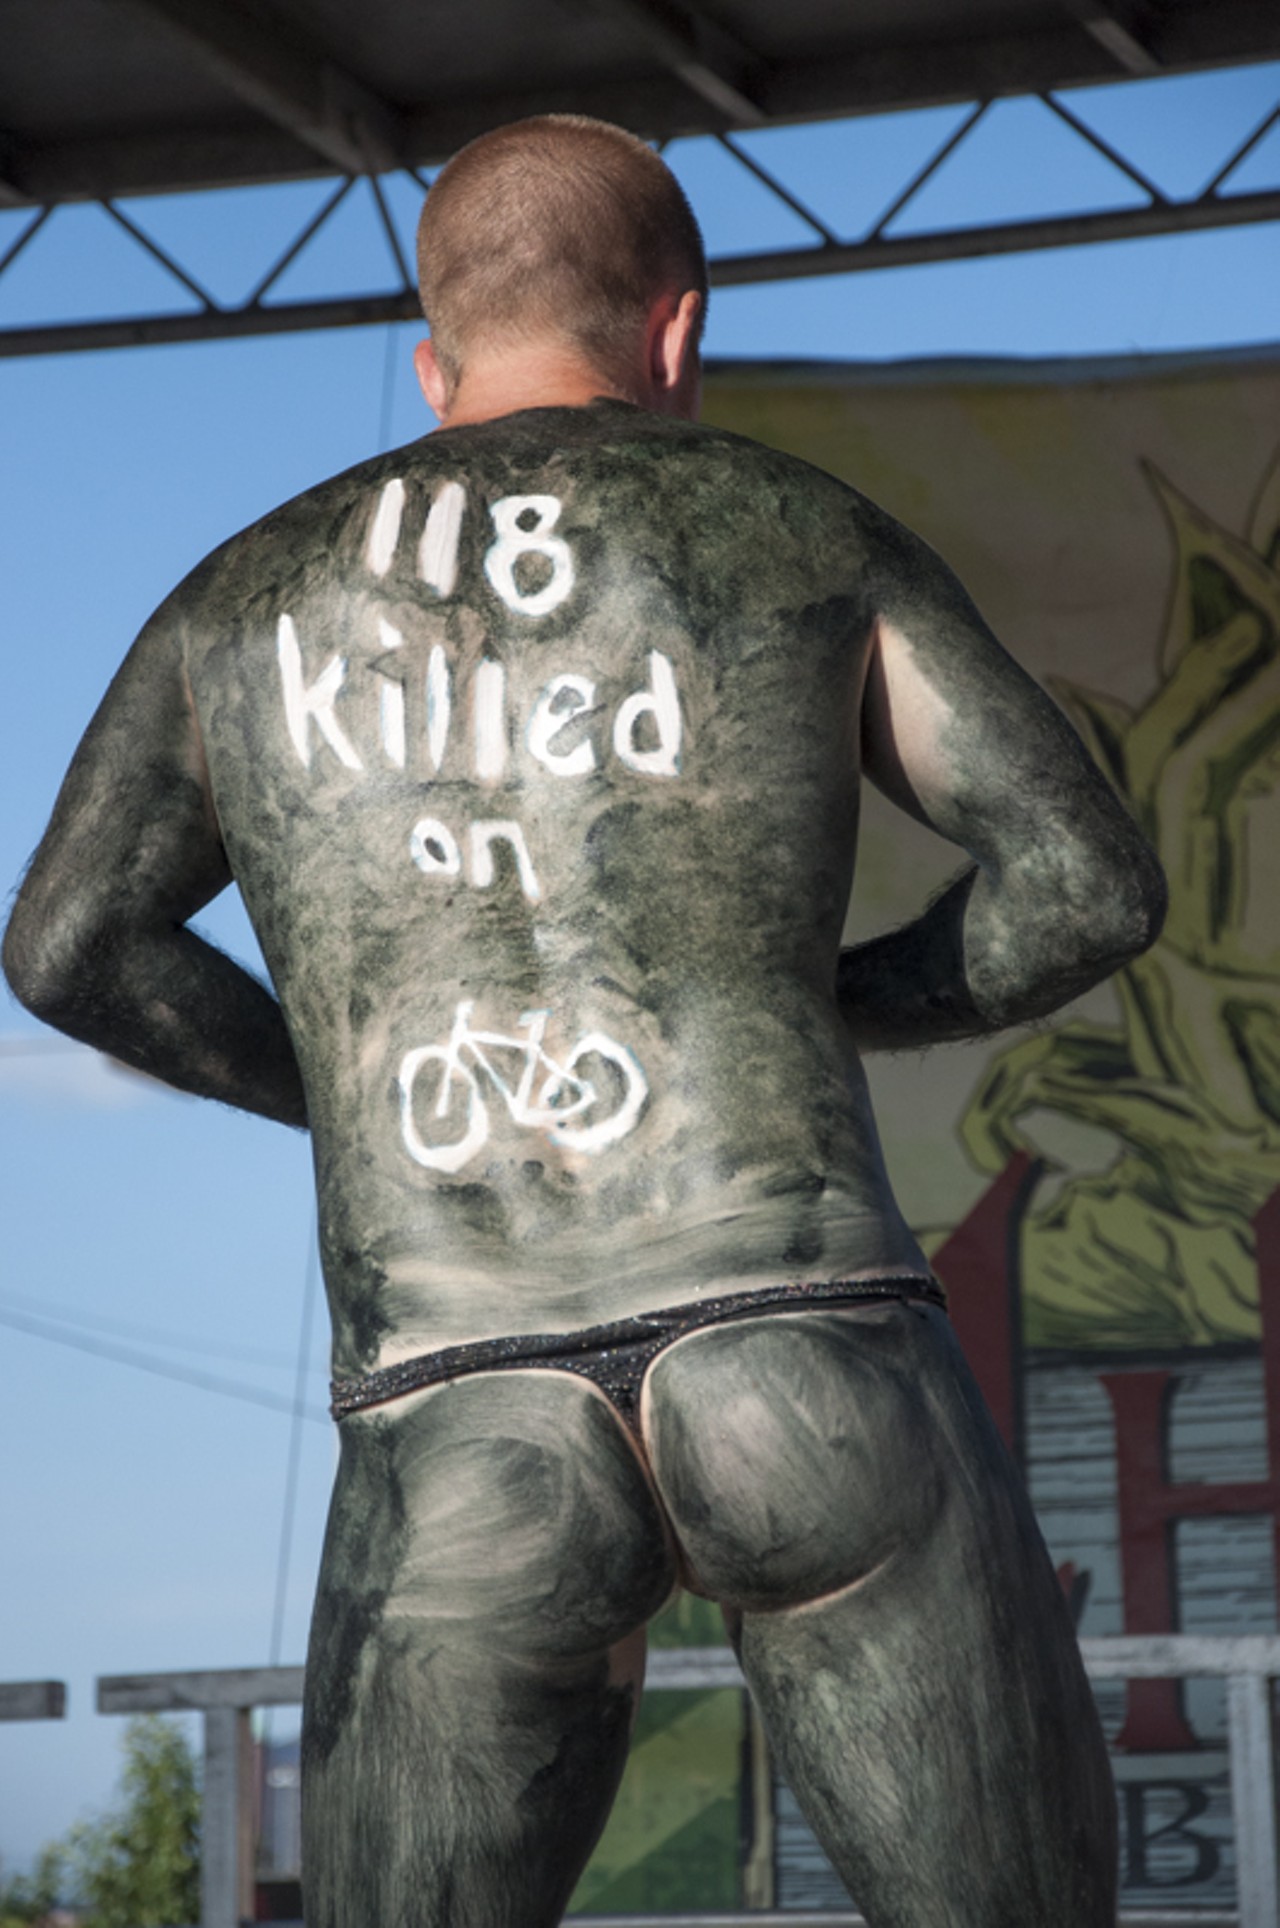 A contestant raises awareness on the vulnerability of cyclists during the costume contest at 2015 World Naked Bike.